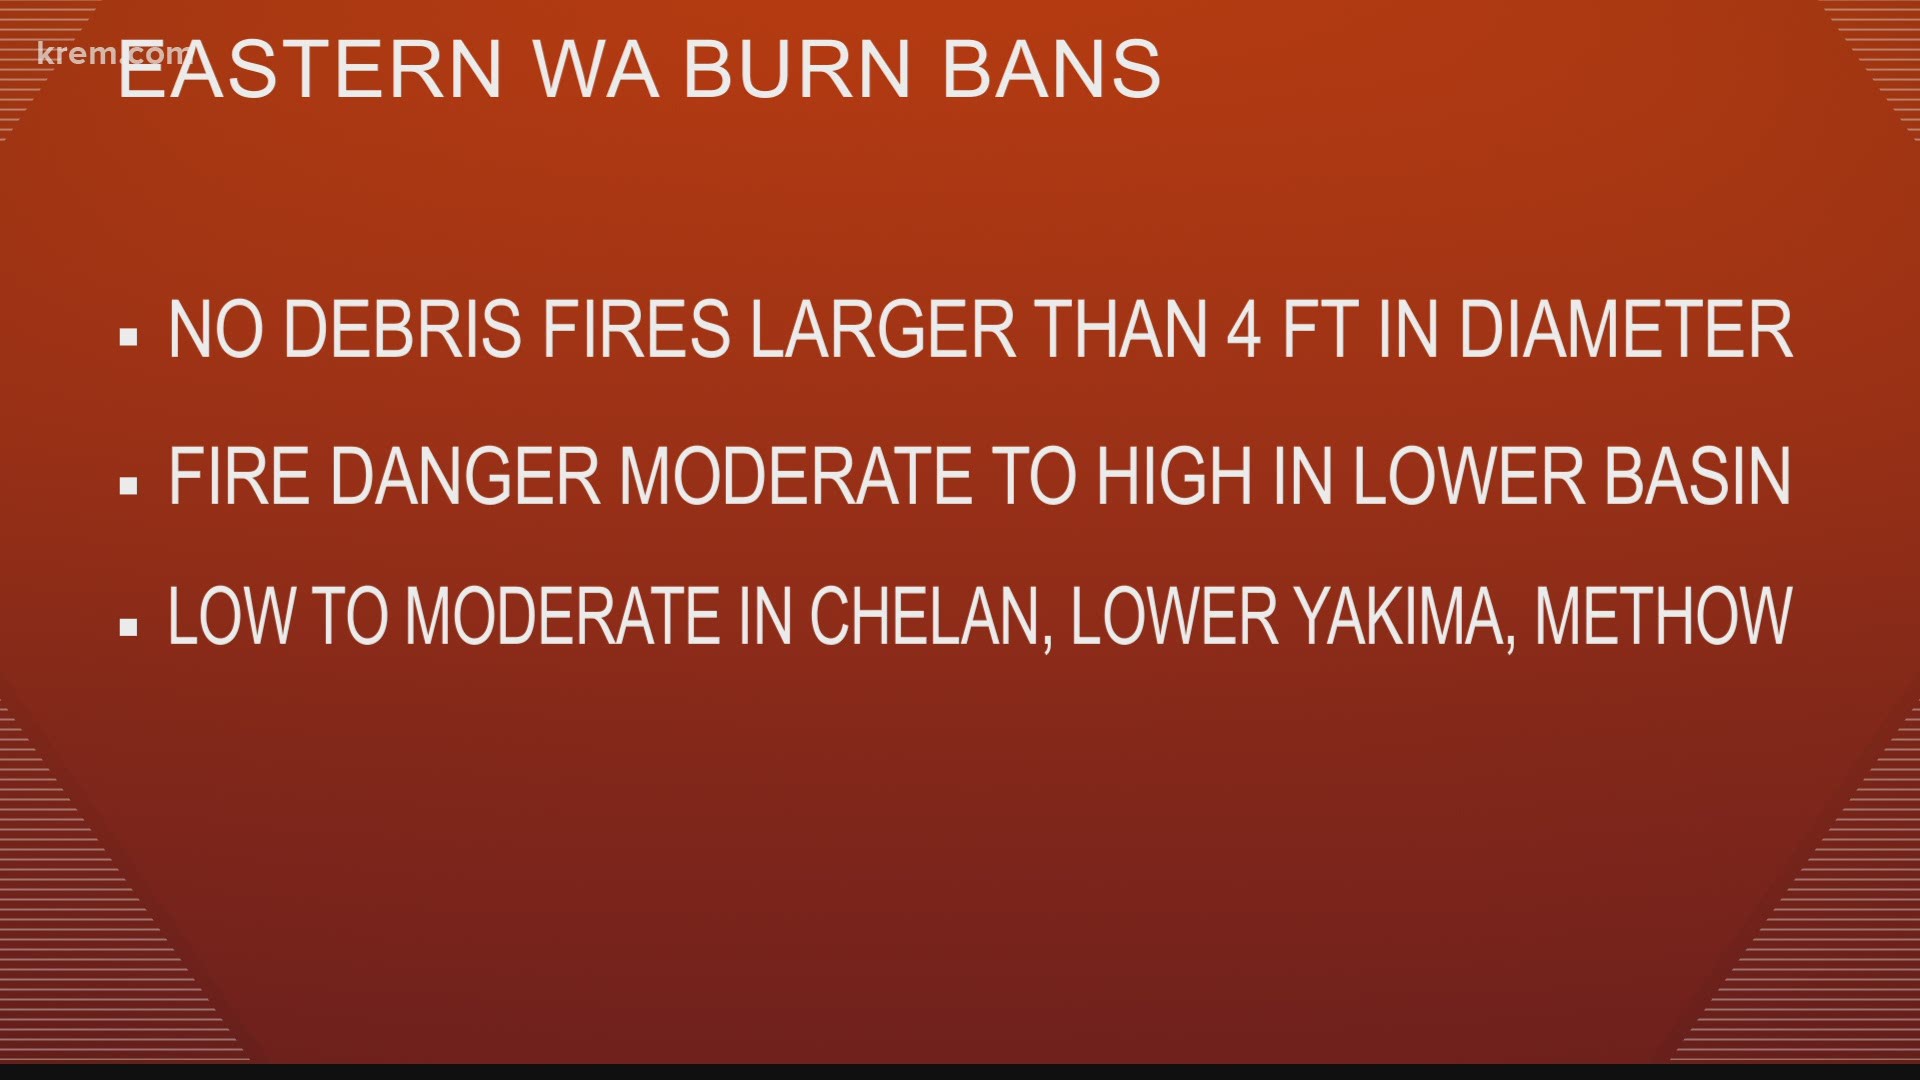 The burn restrictions are due to an increased fire danger.